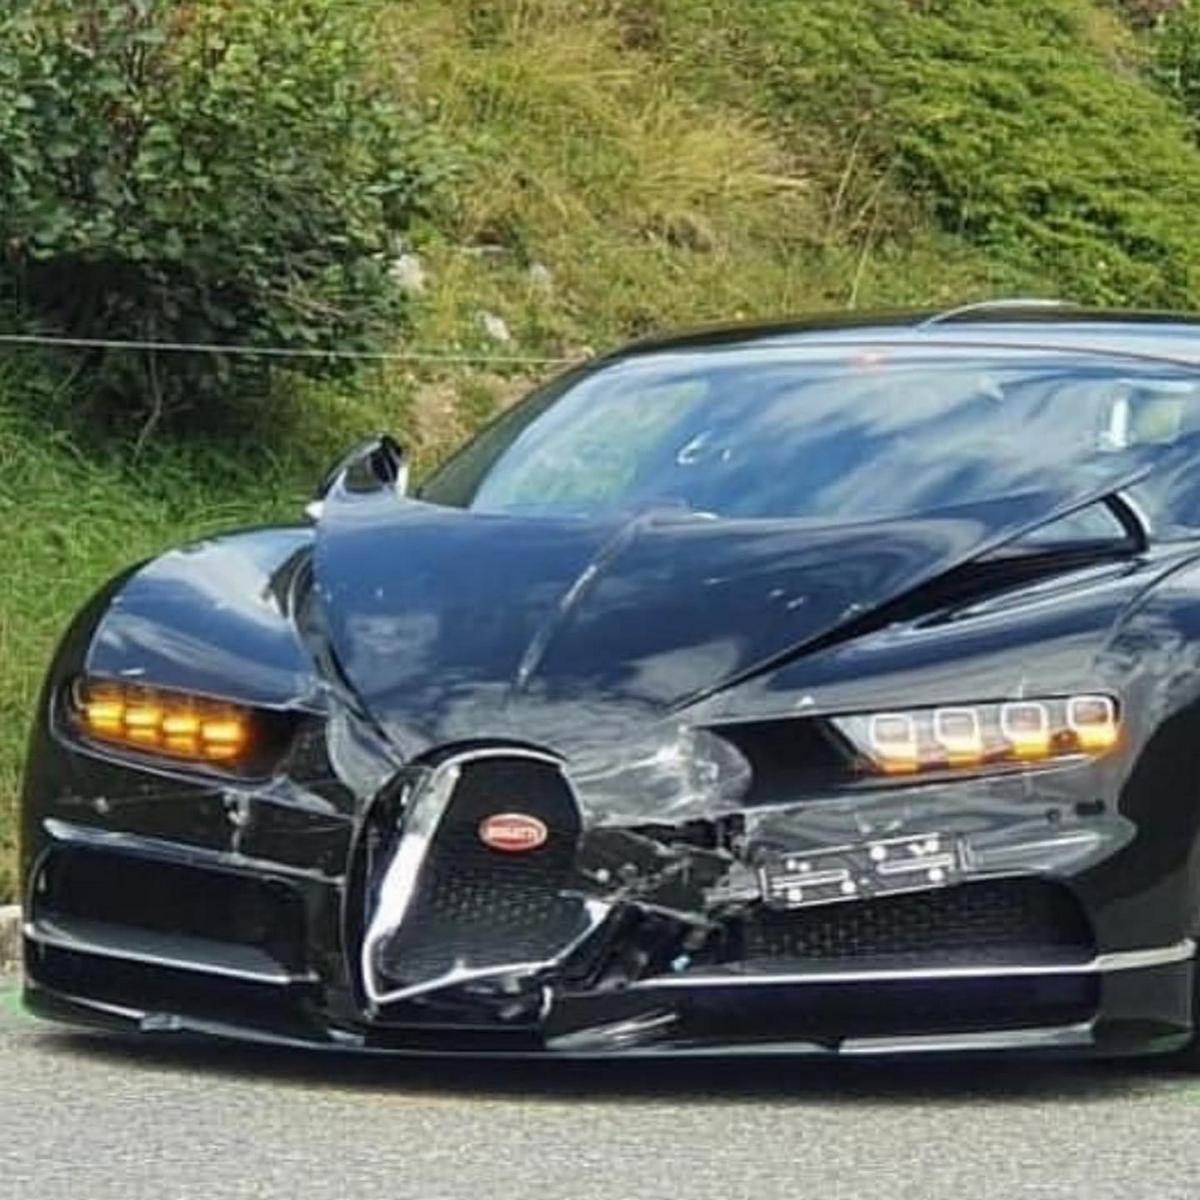 Just painful - Bugatti Chiron crashes into Porsche 911 while trying to overtake a motorhome - Luxurylaunches